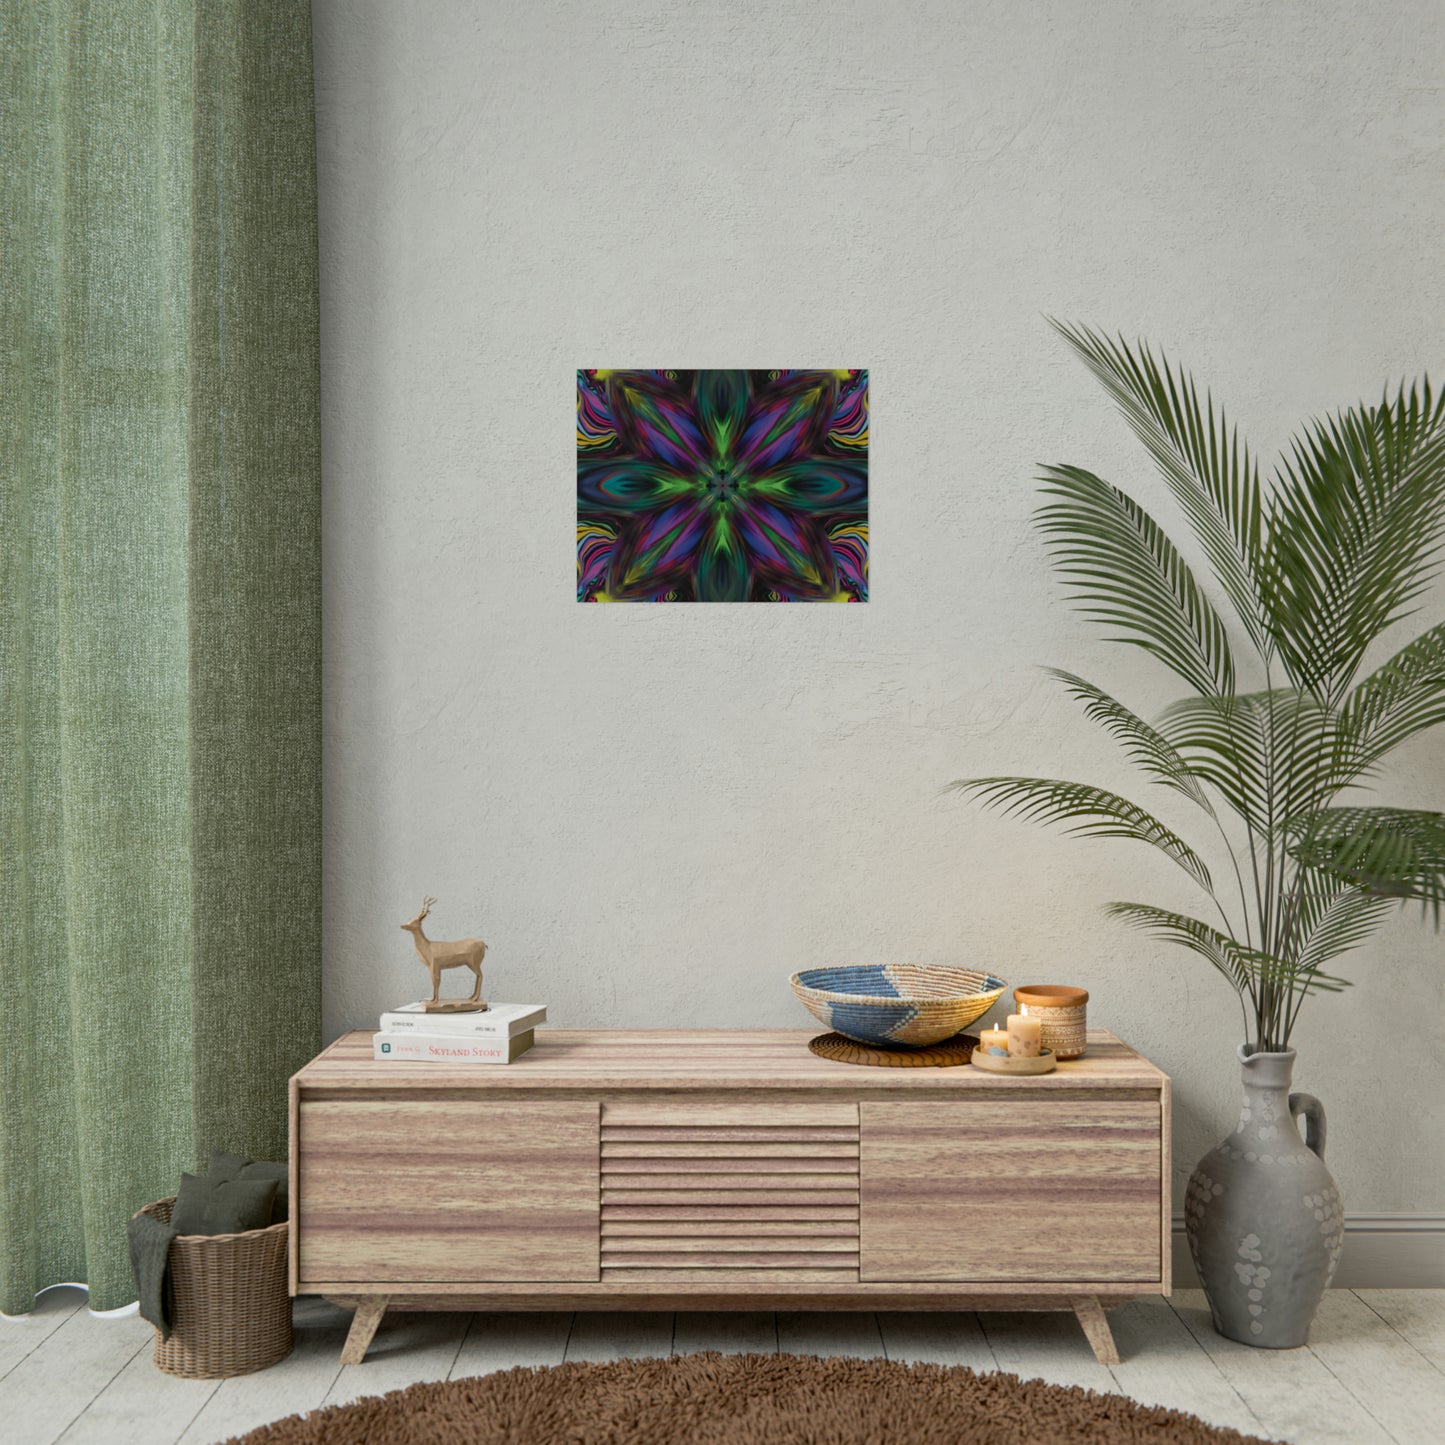 Rainbow Abstract Flower Energy Art Poster - Portal to Relaxation and Imagination